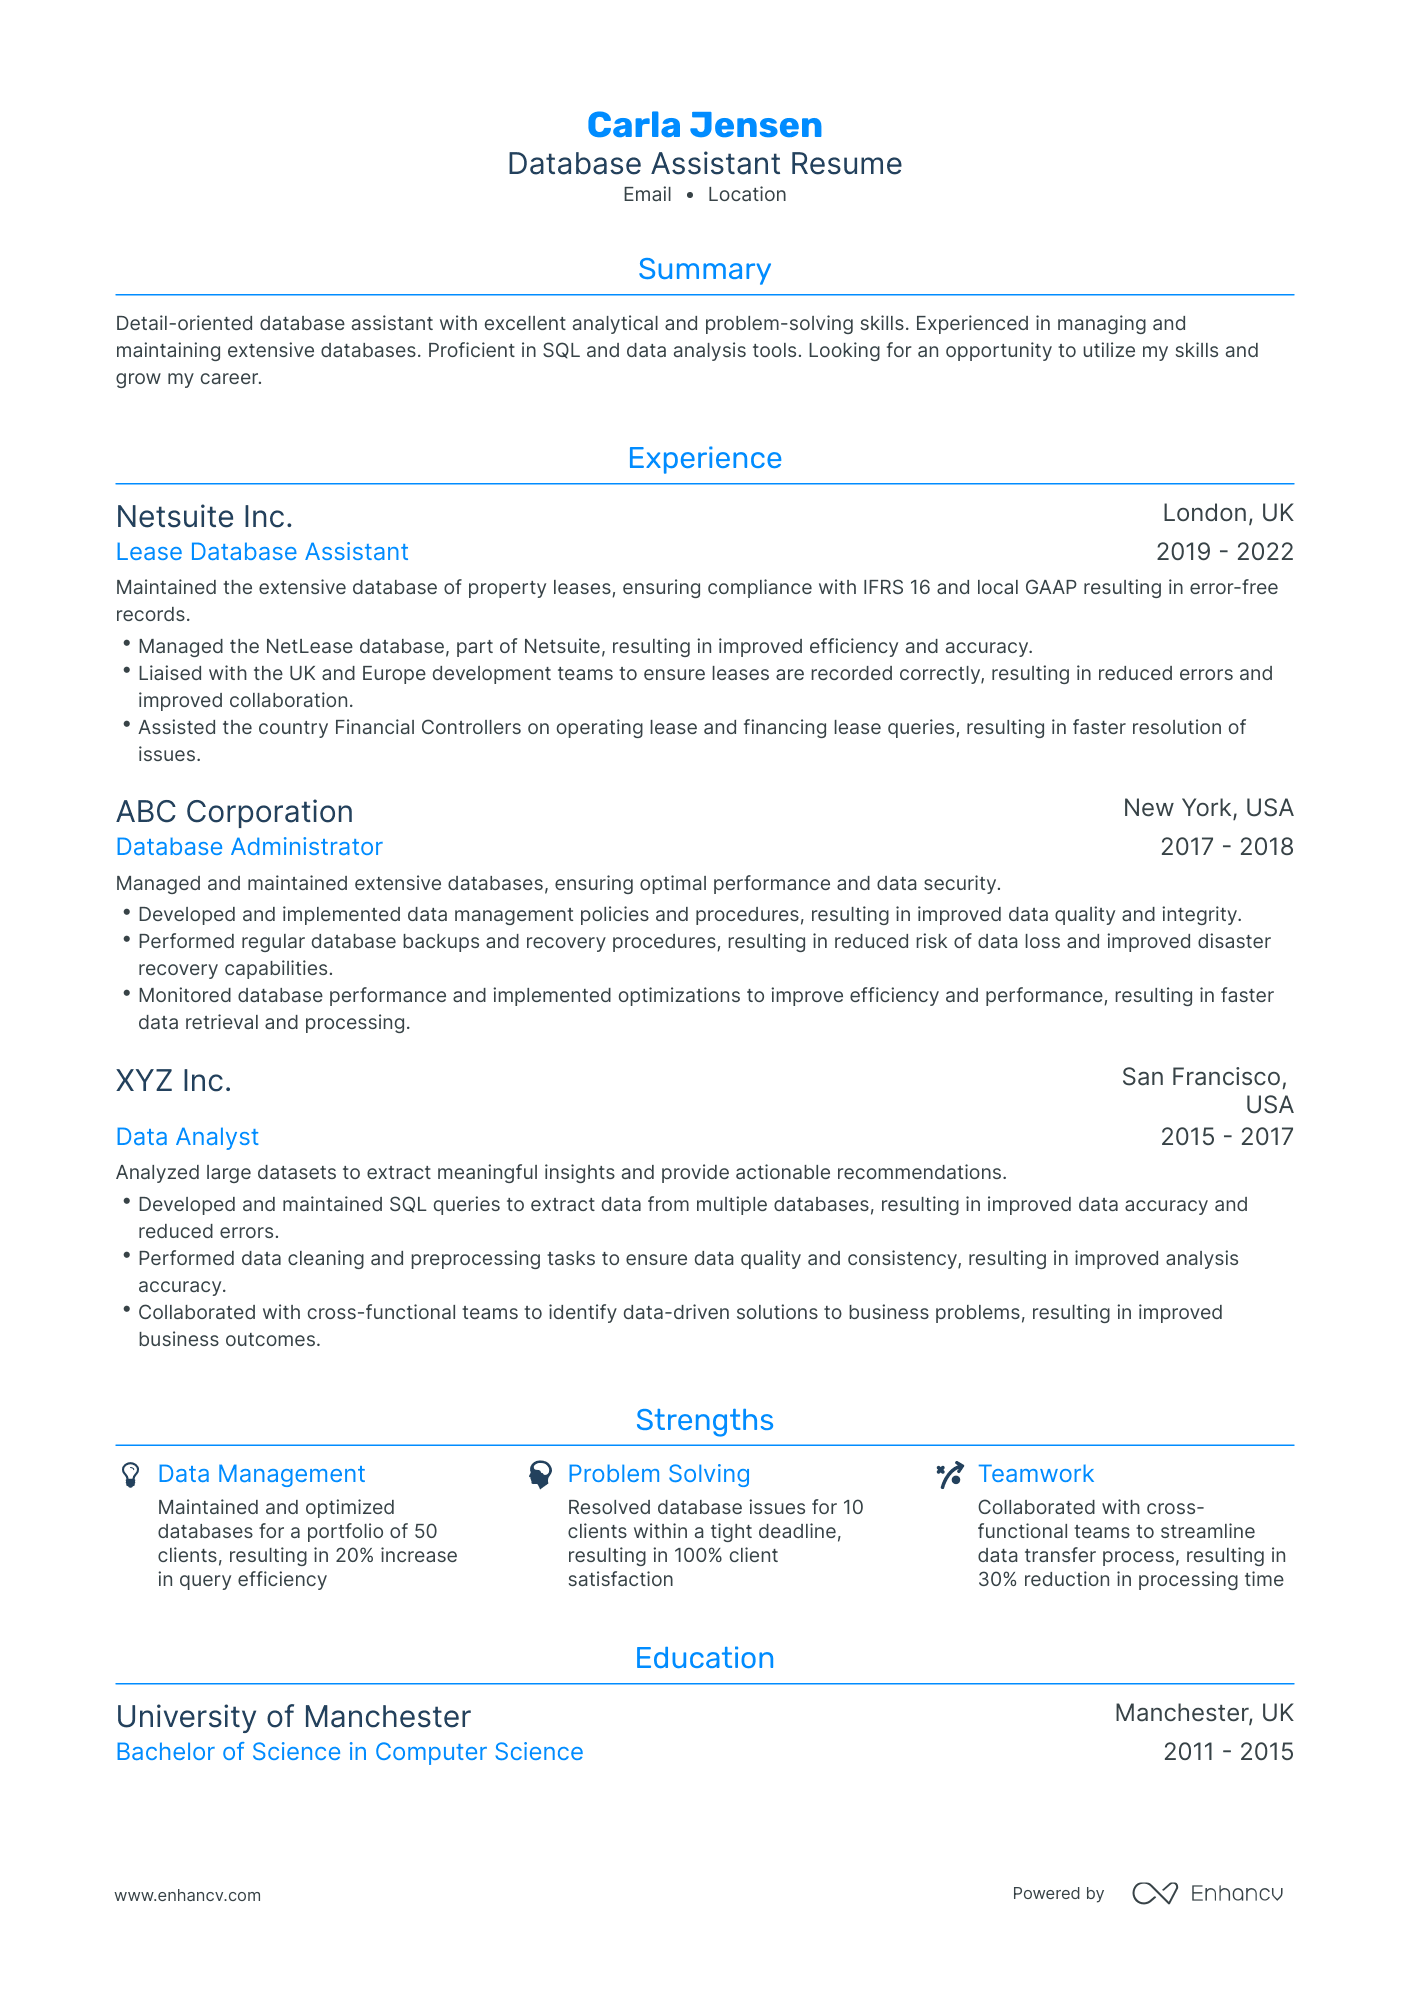 Traditional Database Assistant Resume Template